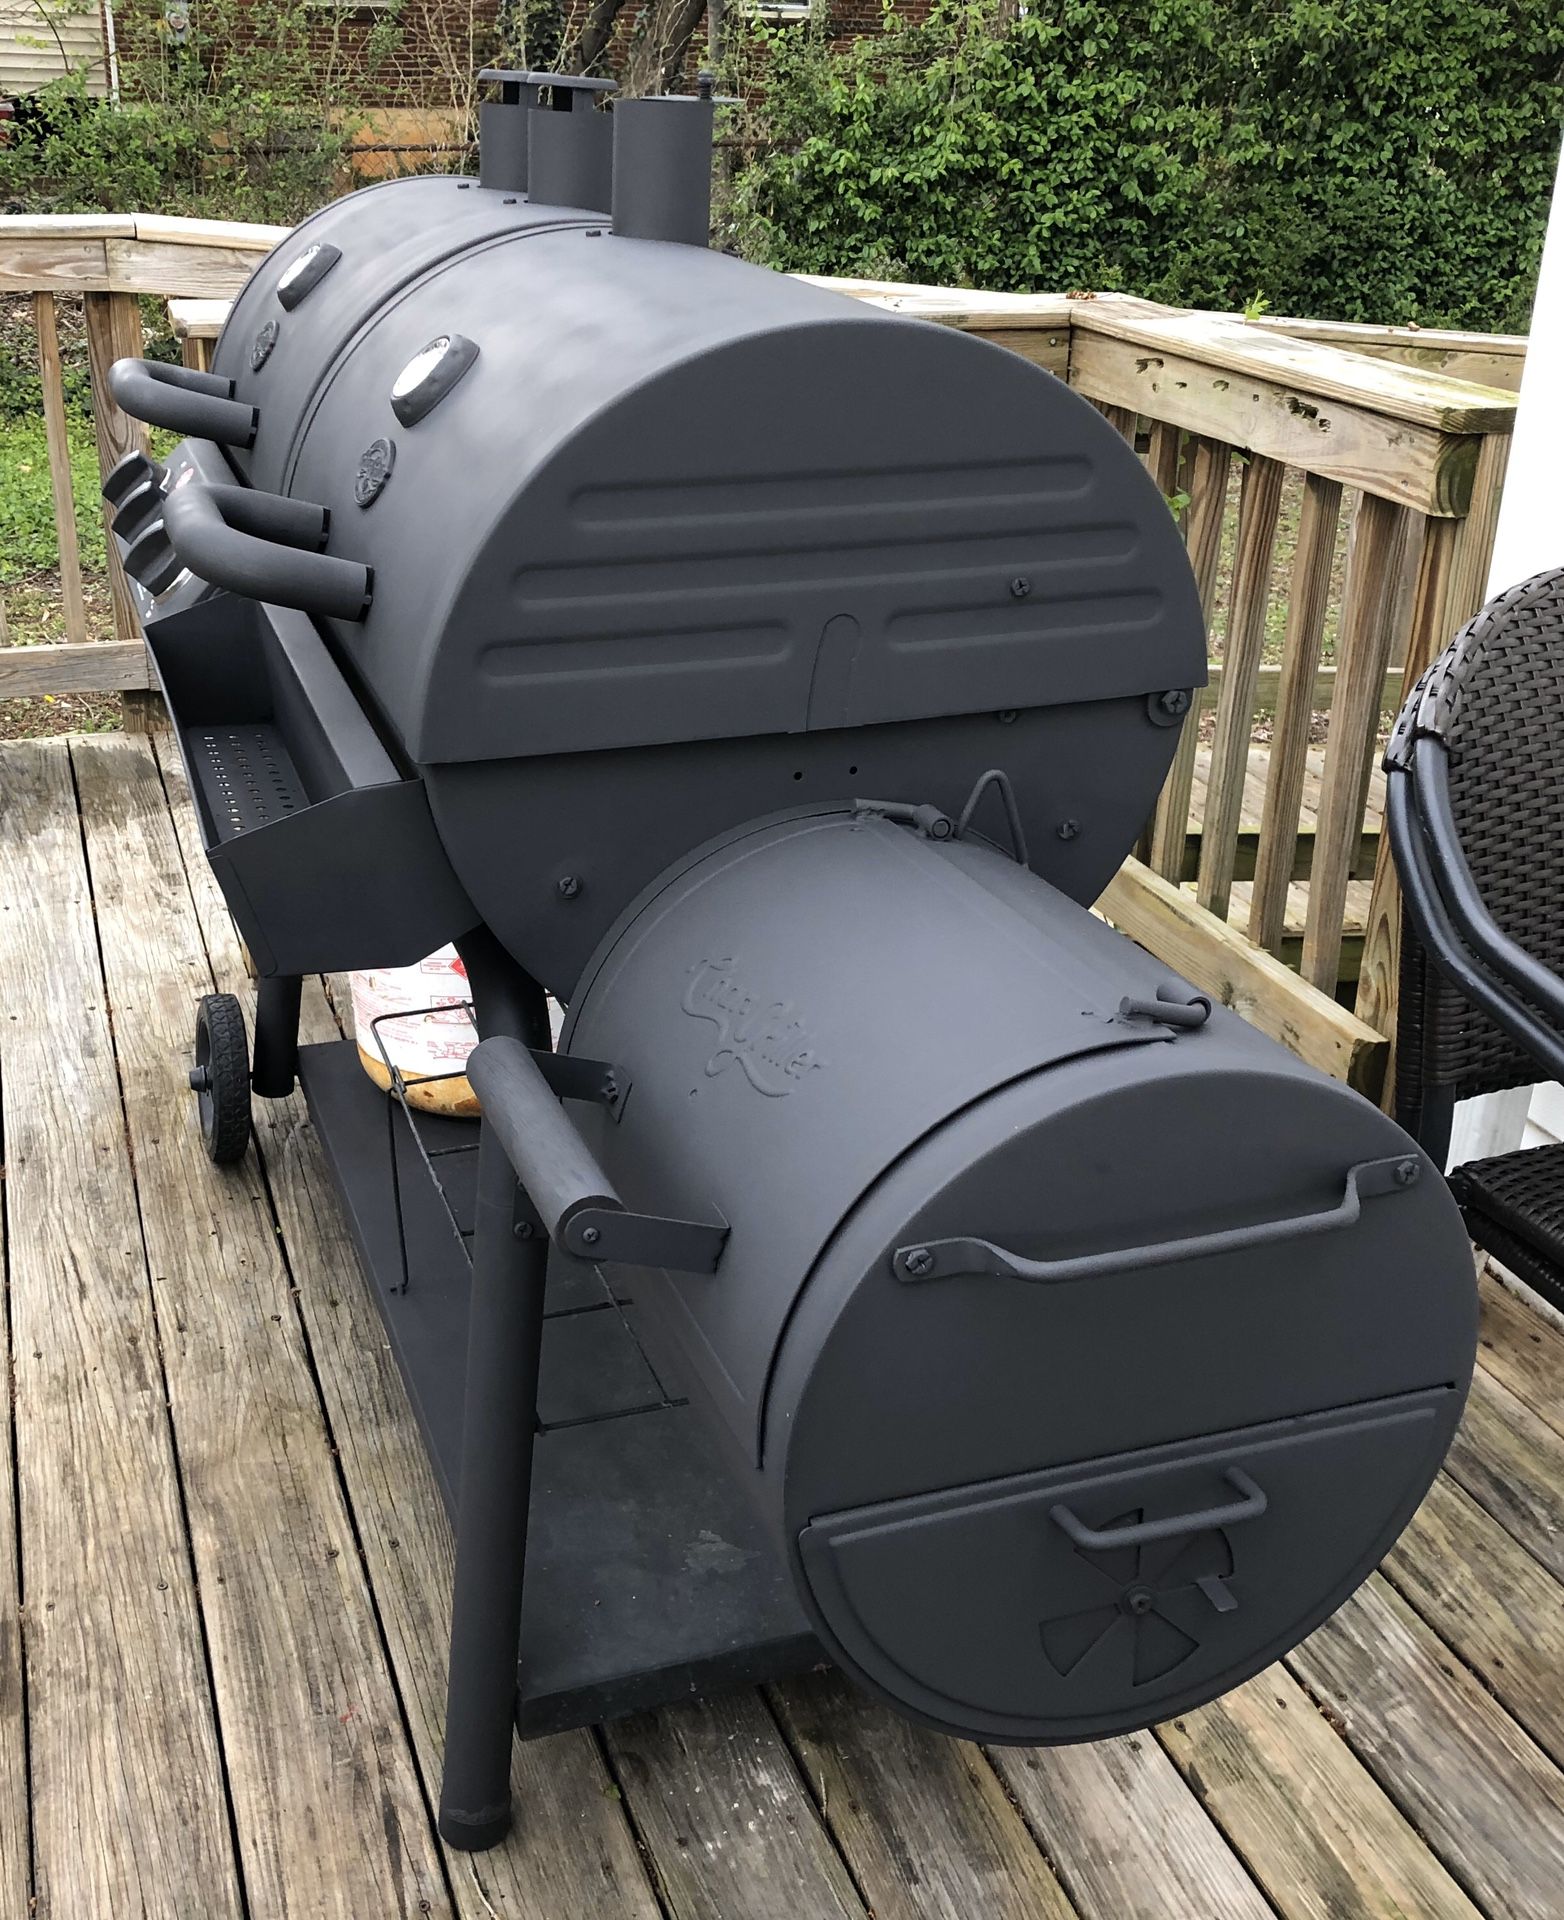 Chargriller 5050 duo w firebox